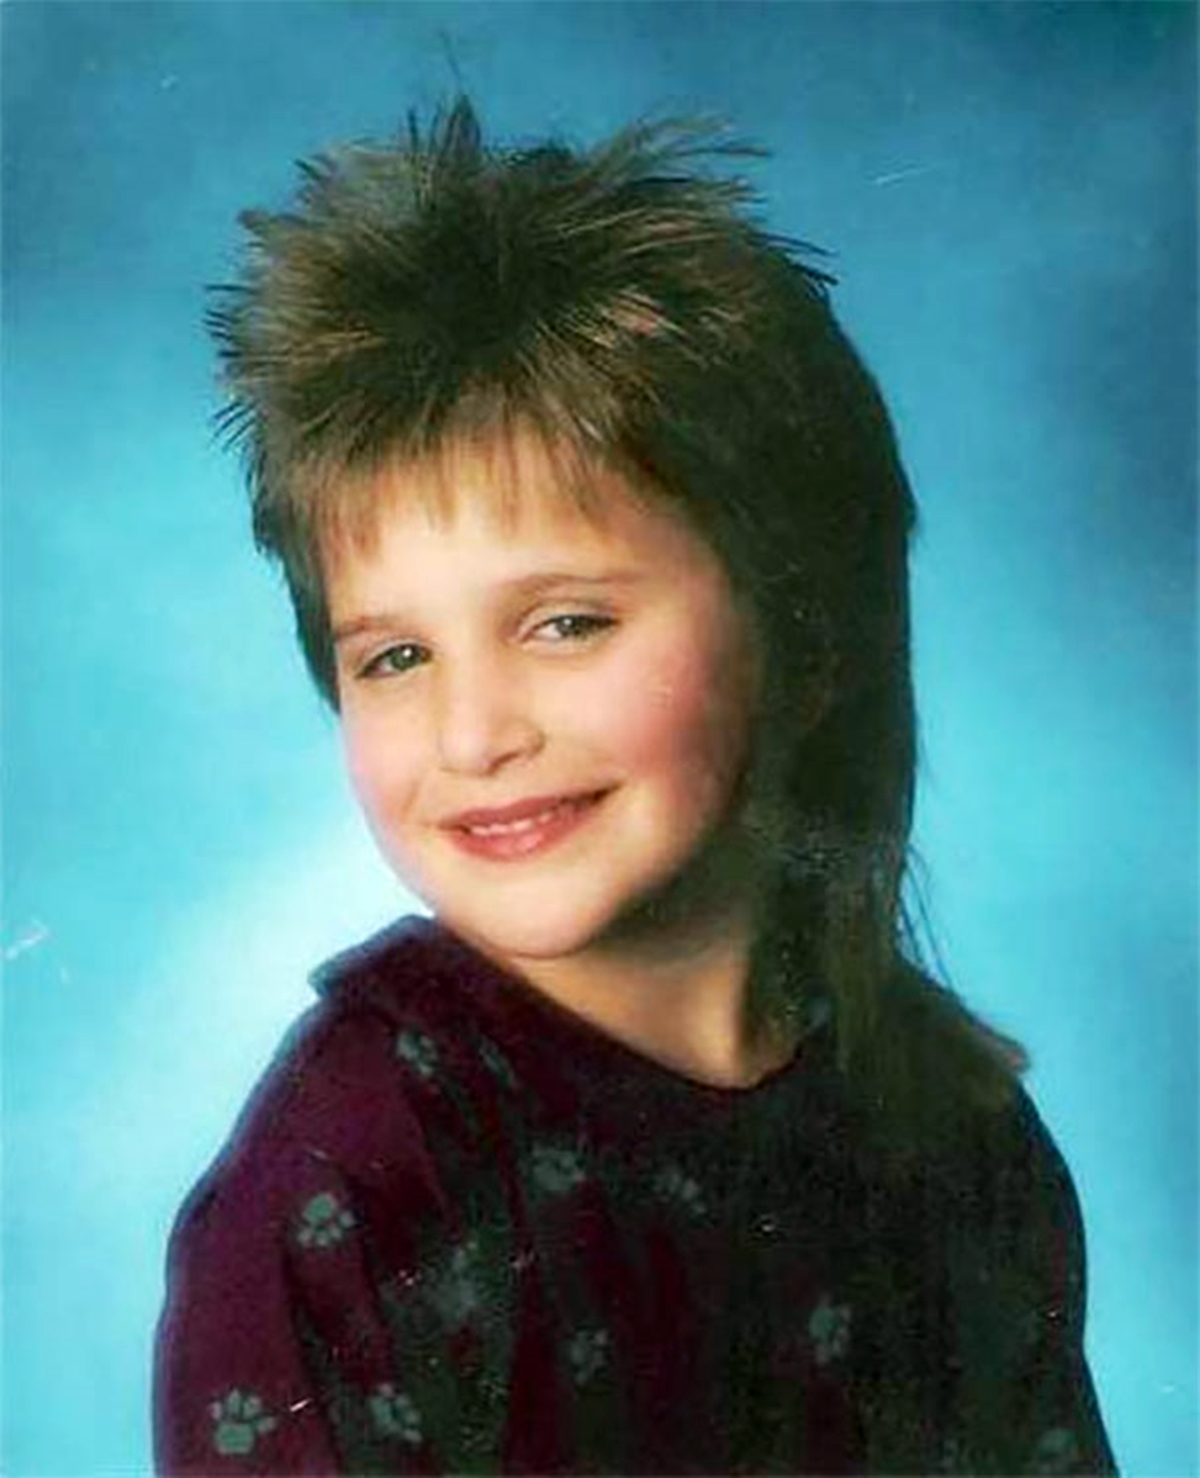 20 Cringeworthy 80s Kids Hairstyles That Have To Be Seen To Be Believed